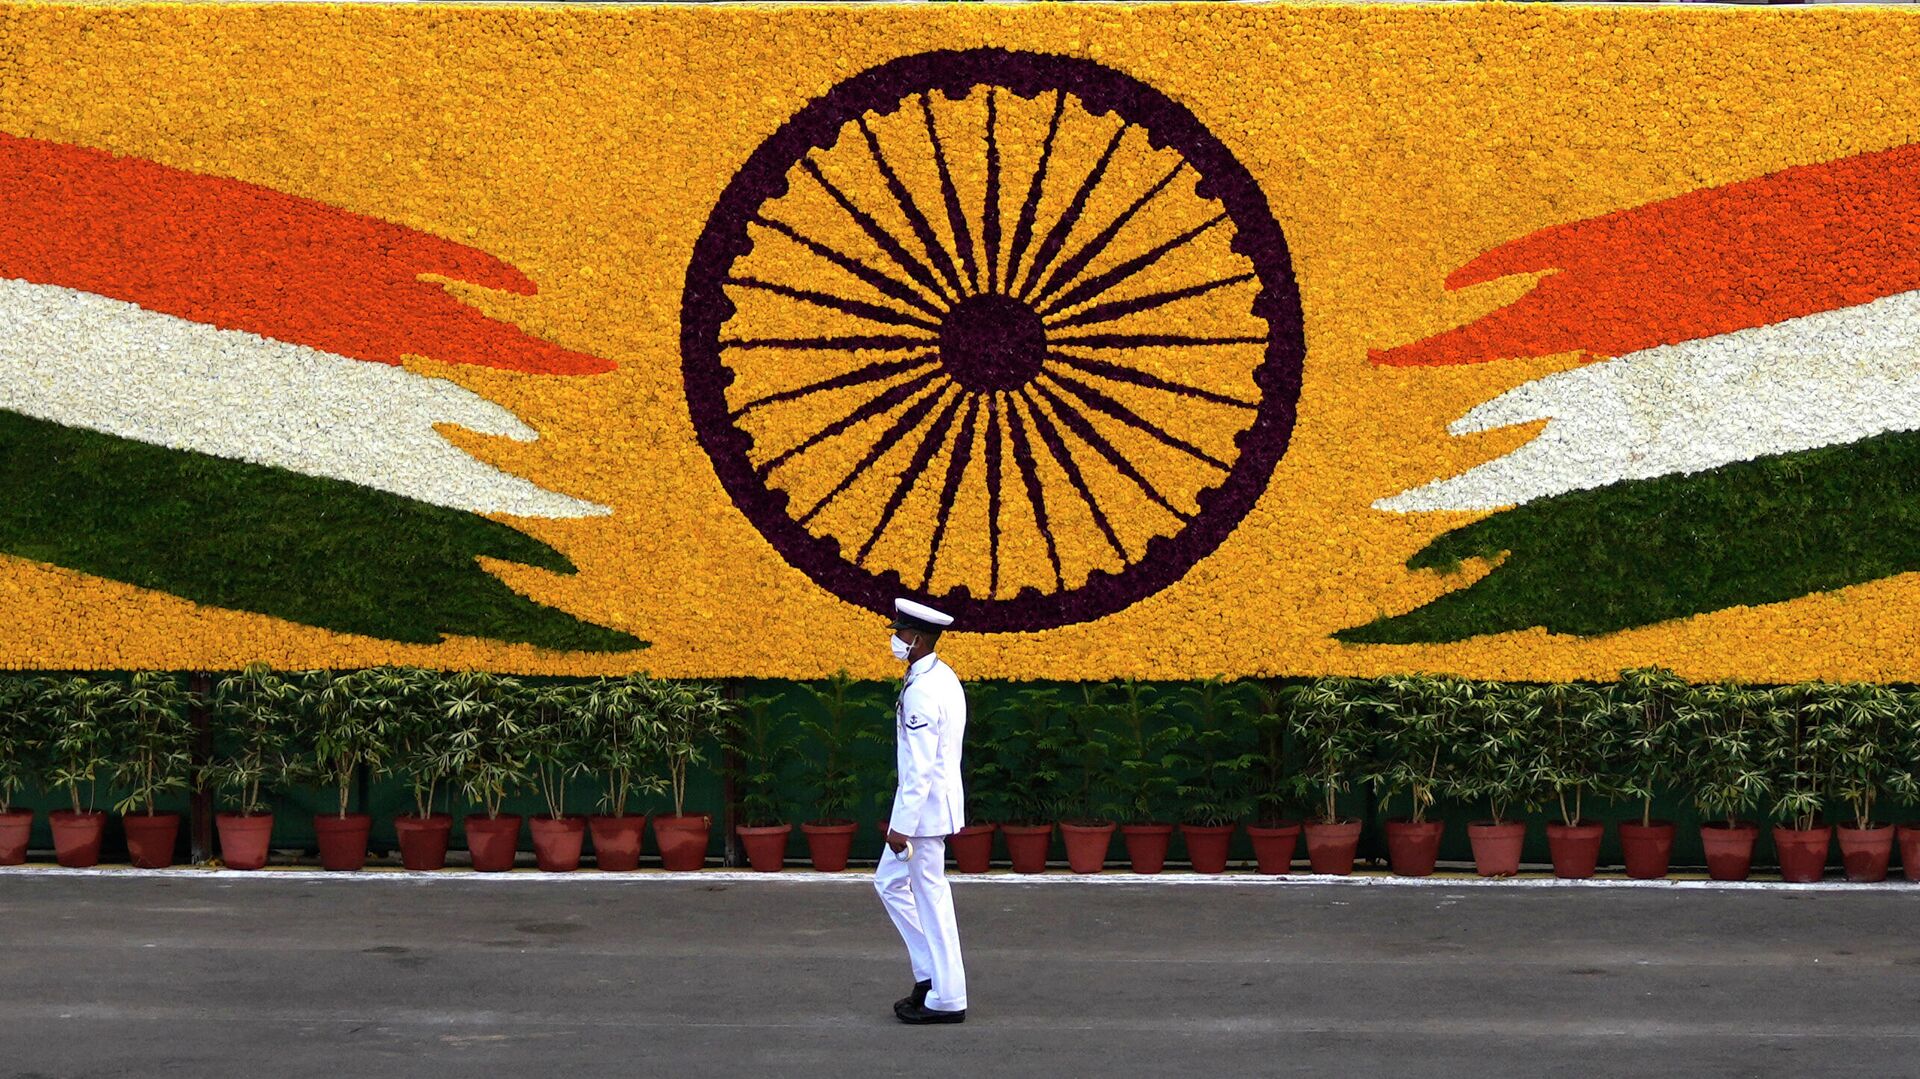 An Indian navy sailor walks past the national flag emblem during Independence Day celebrations at the historic 17th century Red Fort in New Delhi, India, Sunday, Aug. 15, 2021 - Sputnik International, 1920, 09.12.2021